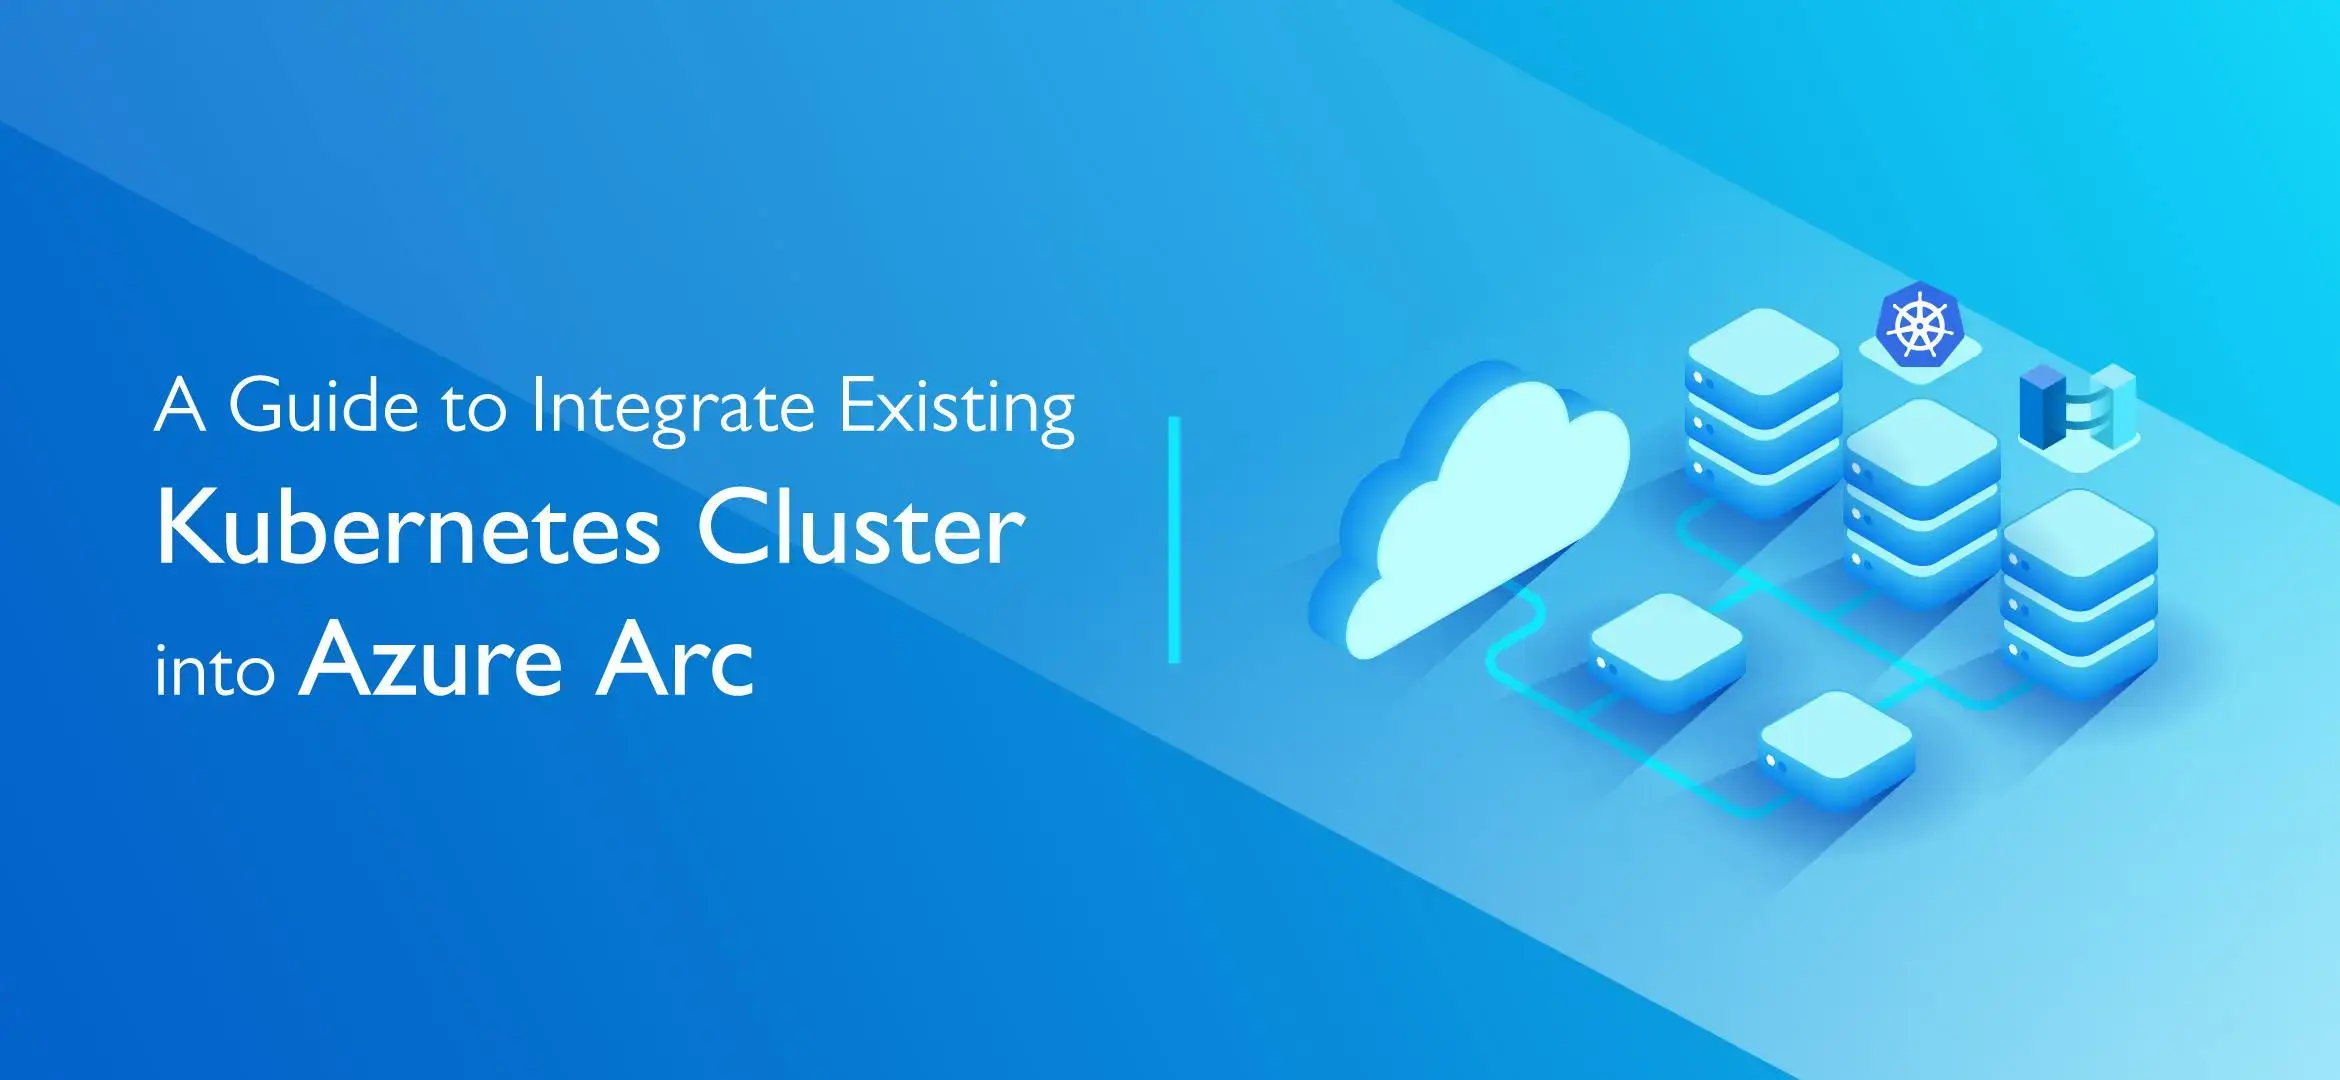 A Guide to Integrate Existing Kubernetes Cluster into Azure Arc